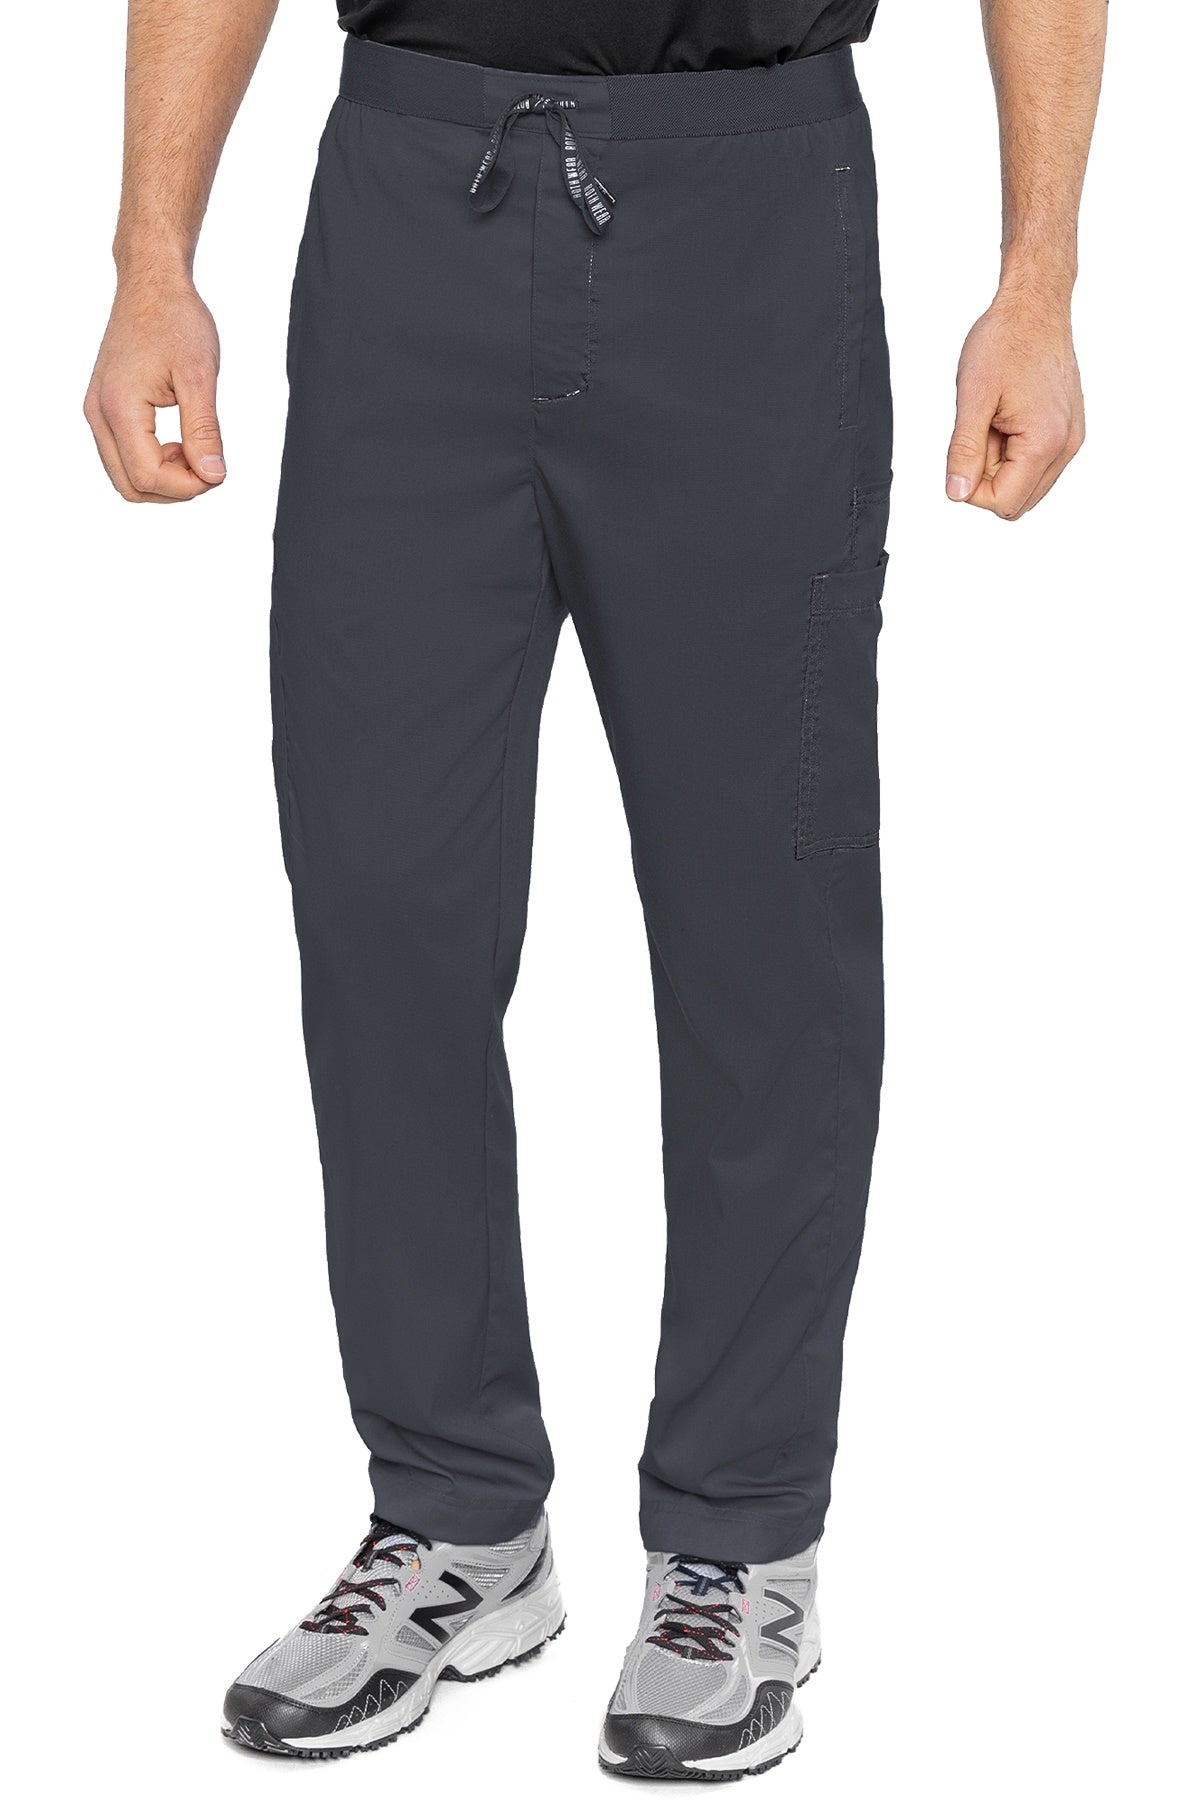 Med Couture Mens Scrub Pants RothWear Hutton Straight Leg in Pewter at Parker's Clothing and Shoes.